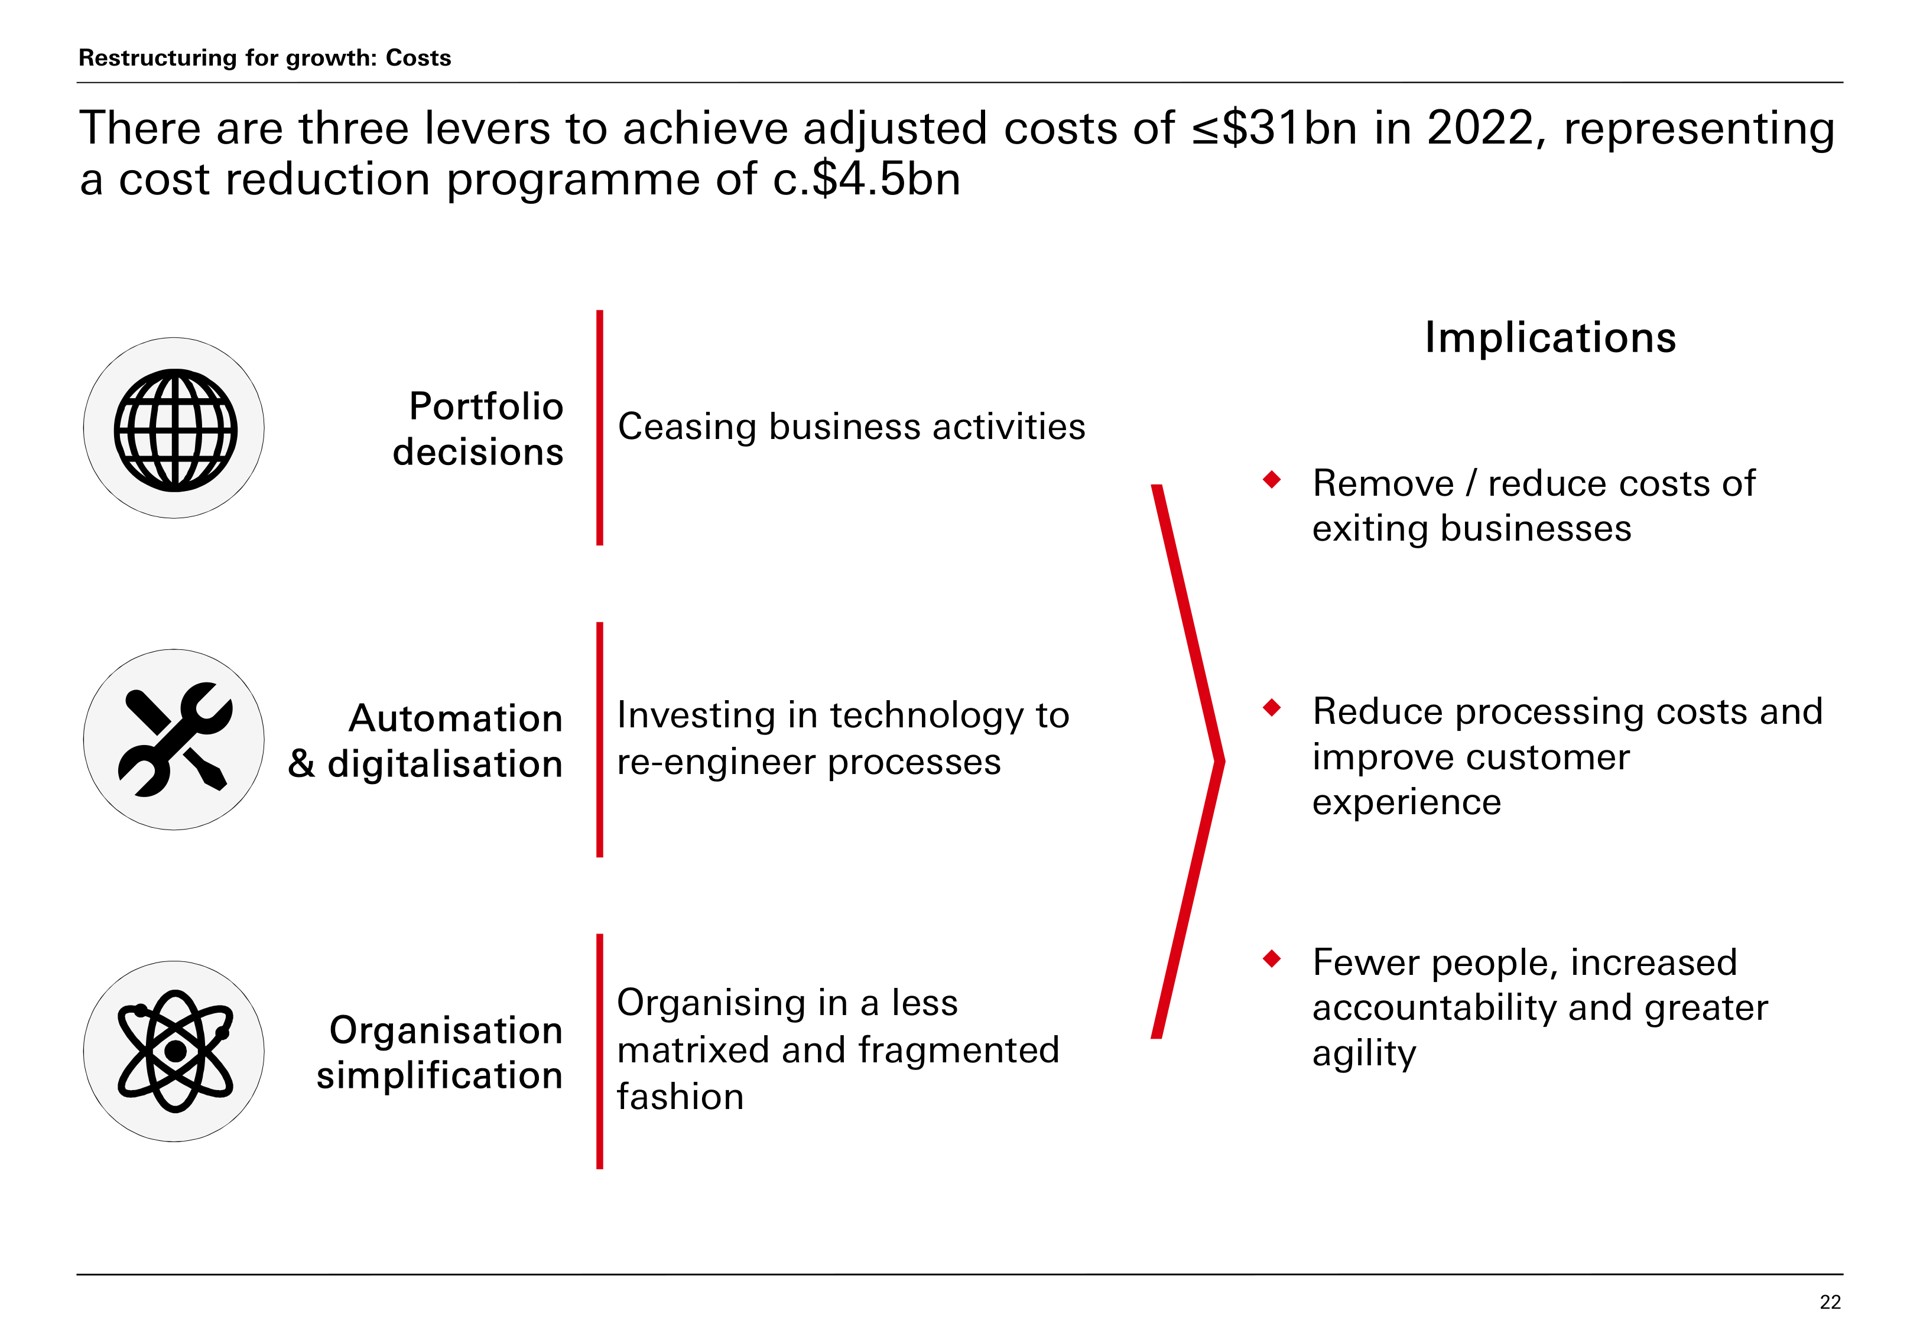 a cost reduction of implications there are three levers to achieve adjusted costs in representing | HSBC